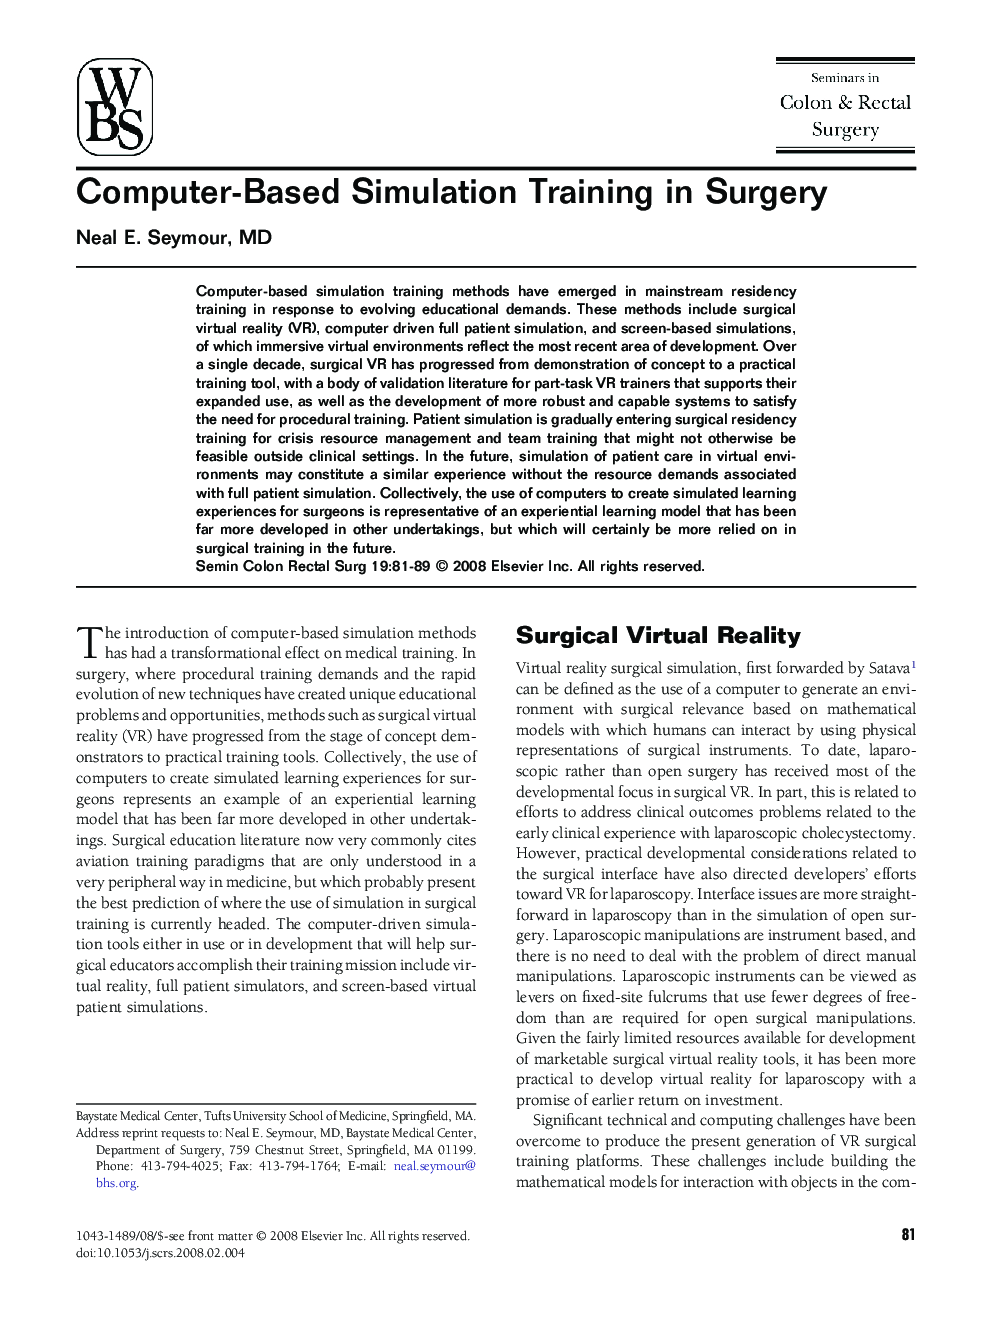 Computer-Based Simulation Training in Surgery